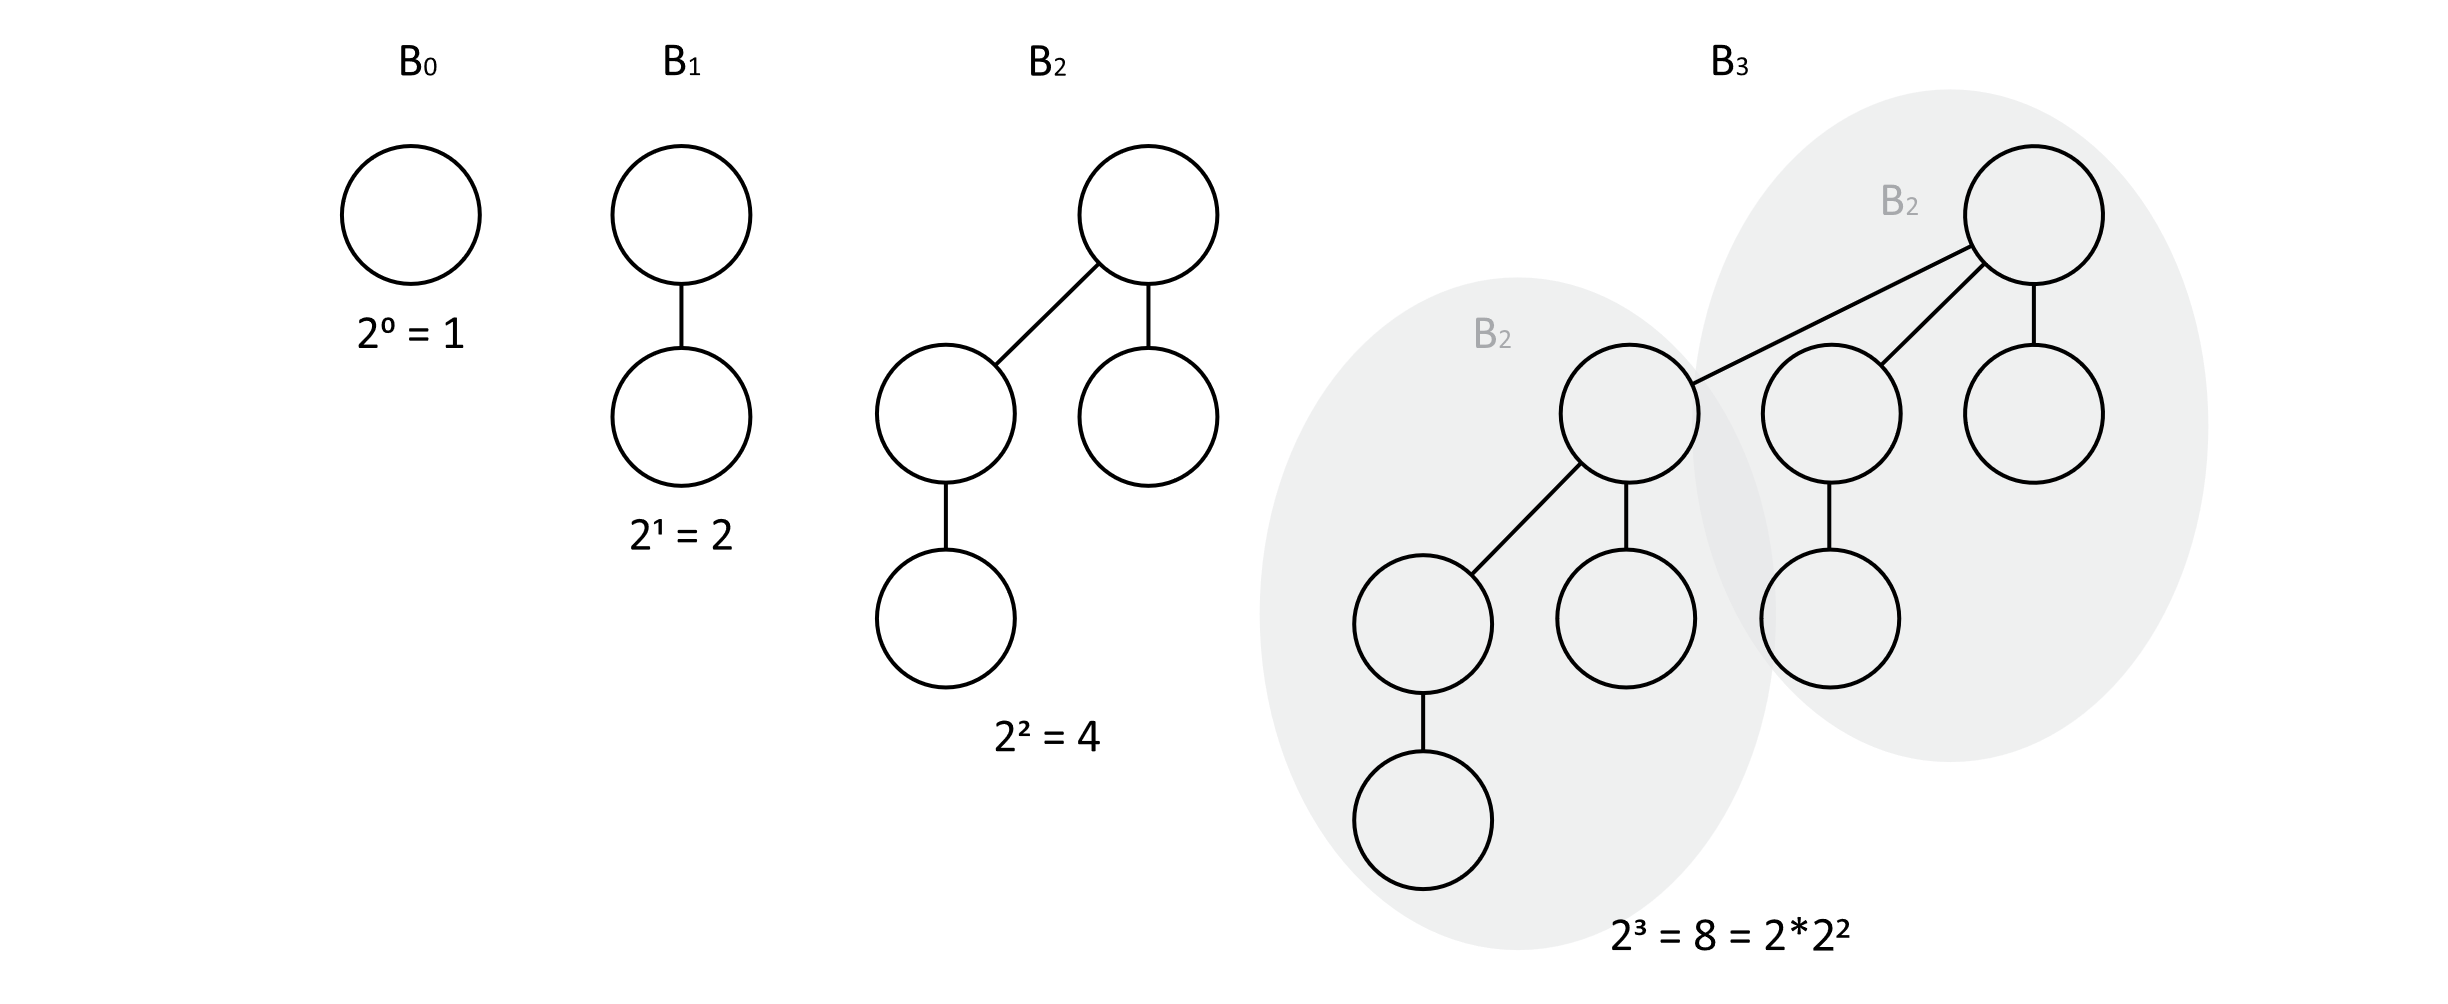 Examples of binomial trees with degrees given. Each degree starting at zero give the number of childred of the root node of the tree. Each binomial tree contains 2 to the degree power nodes.